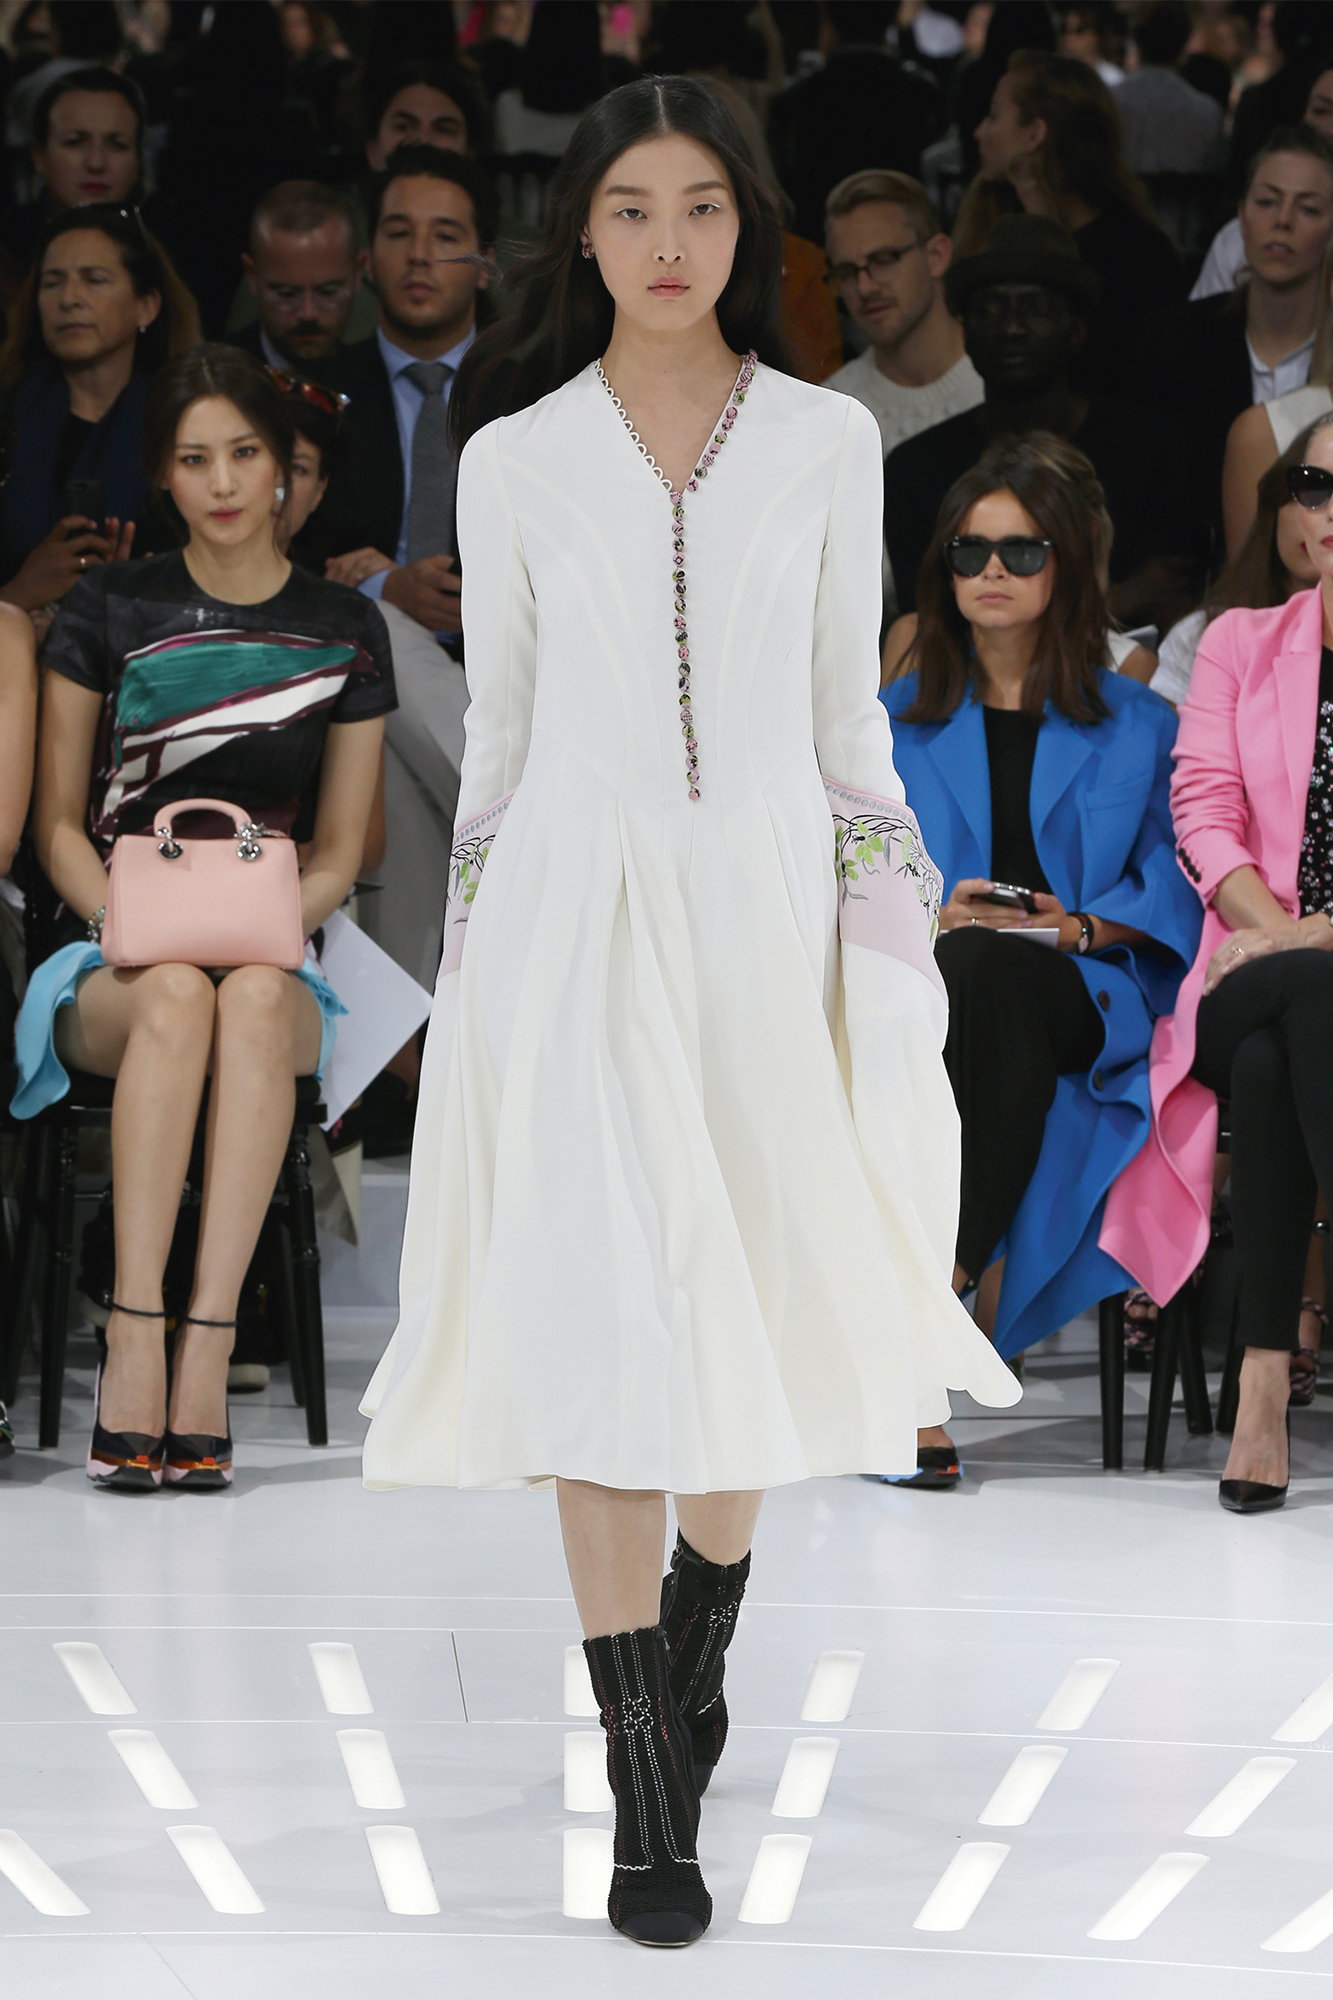 Christian Dior Haute Couture Spring-Summer Ready To Wear Dresses & Accessories Collection 2015-16 (1)